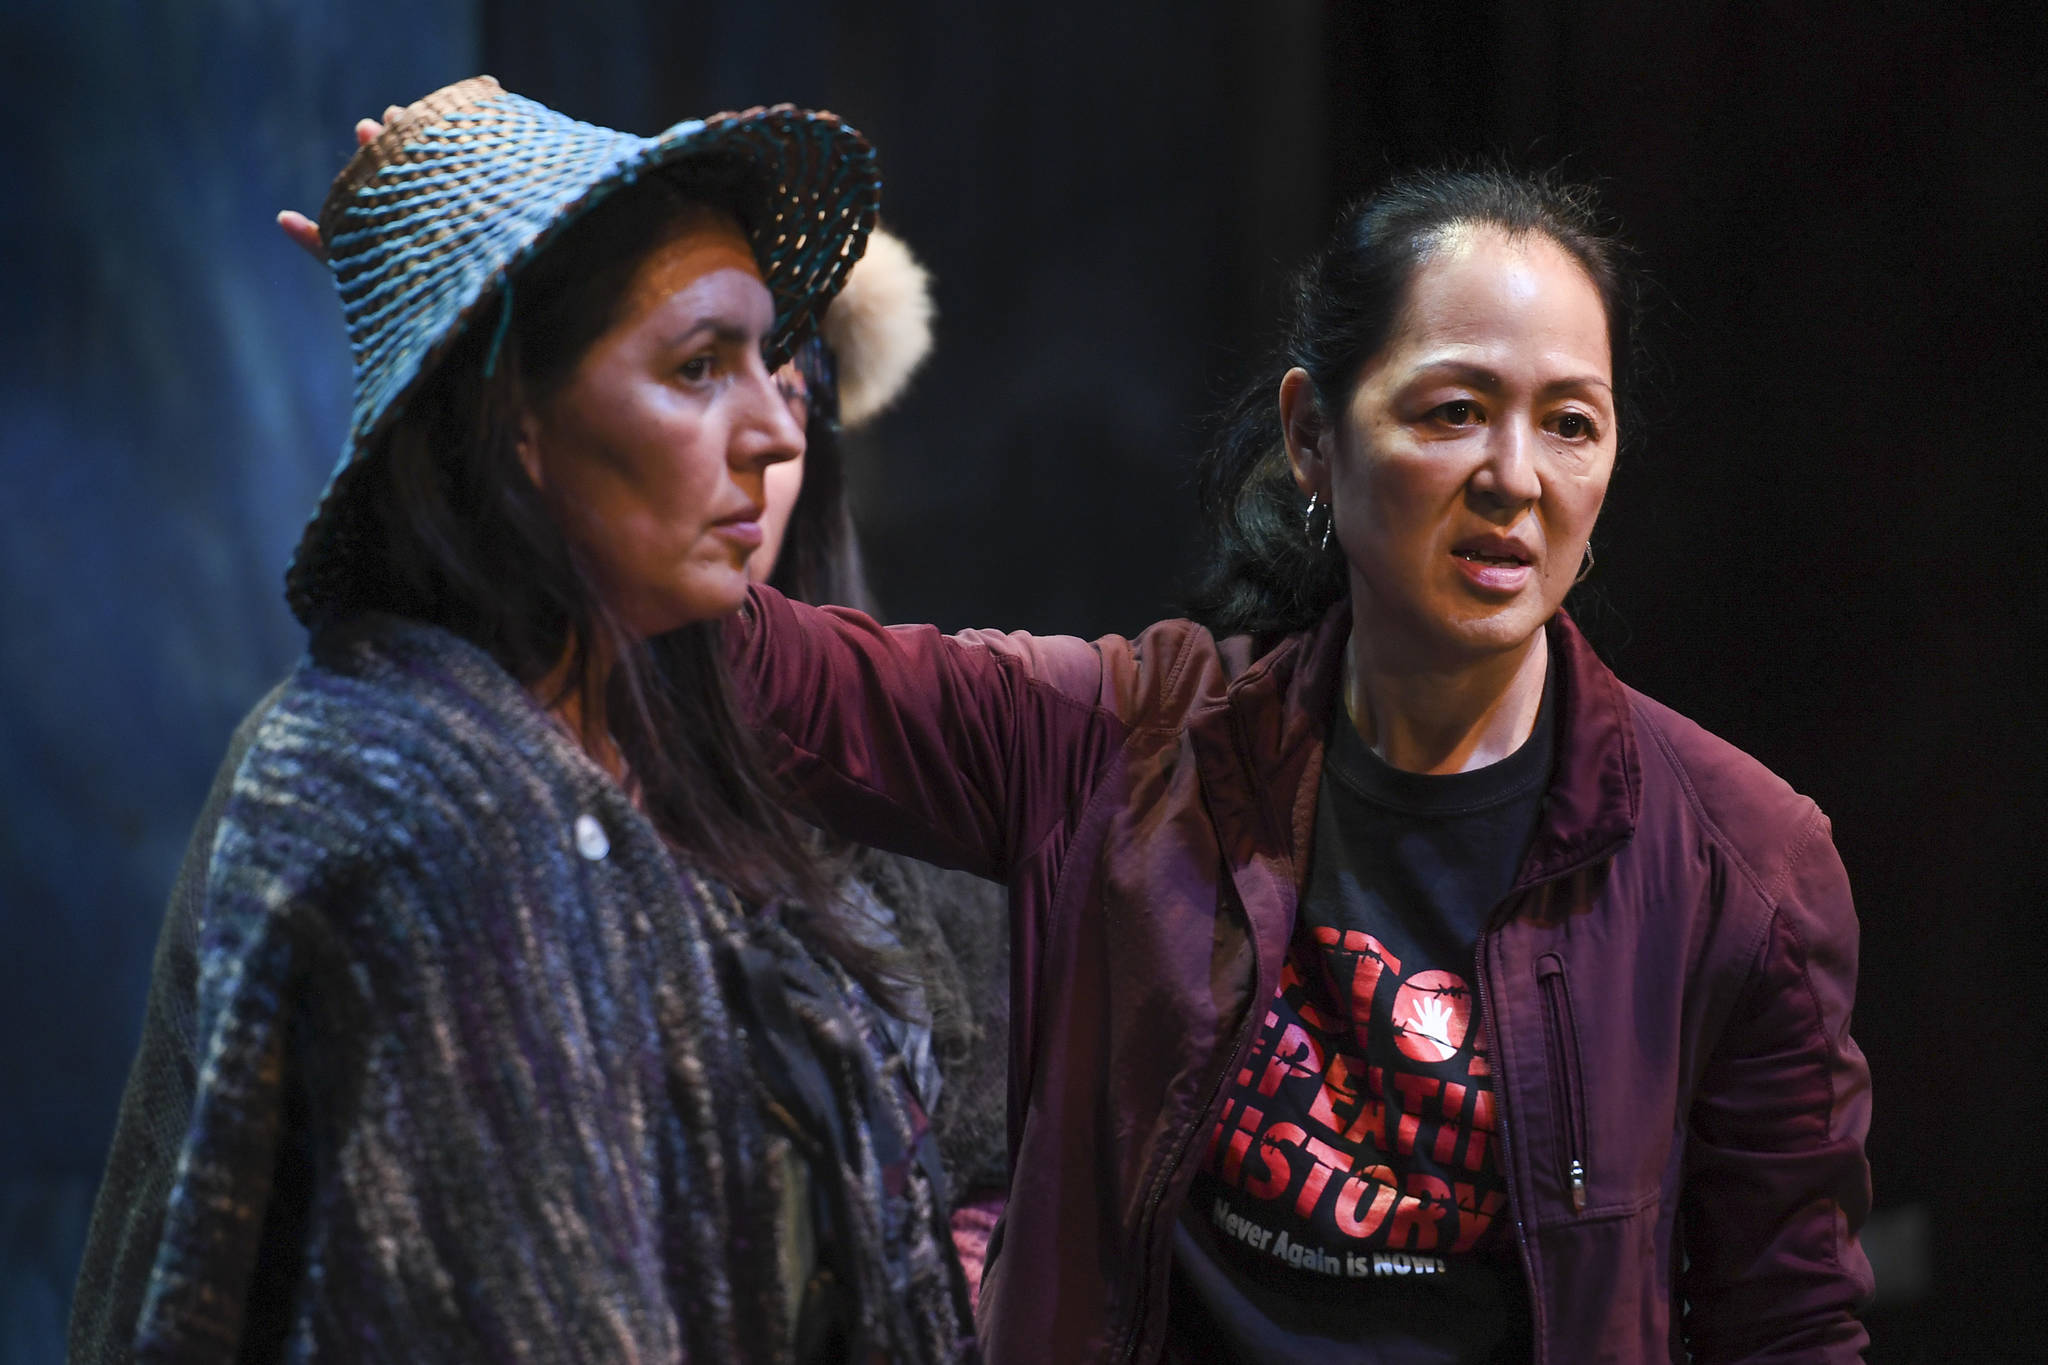 Director Leslie Ishii, right, works with actress Jennifer Bobiwash during Perseverance Theatre’s production of “Devilfish” written by Vera Starbard in September 2019. After serving as the theater’s interim artistic director since July, Ishii has been selected to be the permanent replacement for former artistic director Art Rotch. (Michael Penn | Juneau Empire)